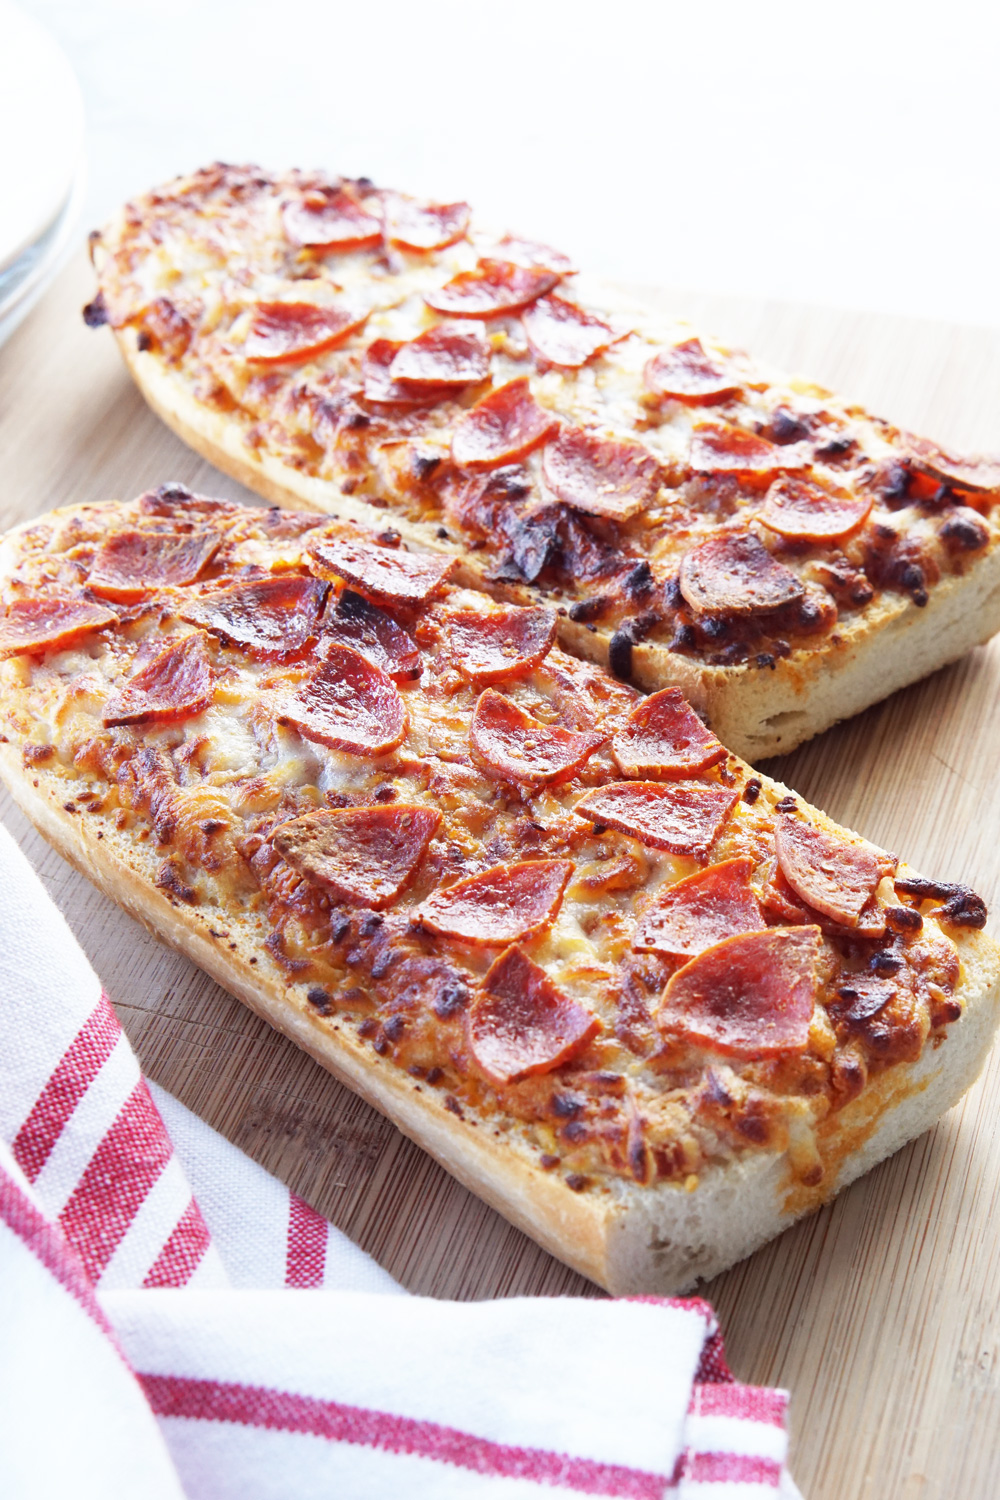 2 French bread pizzas